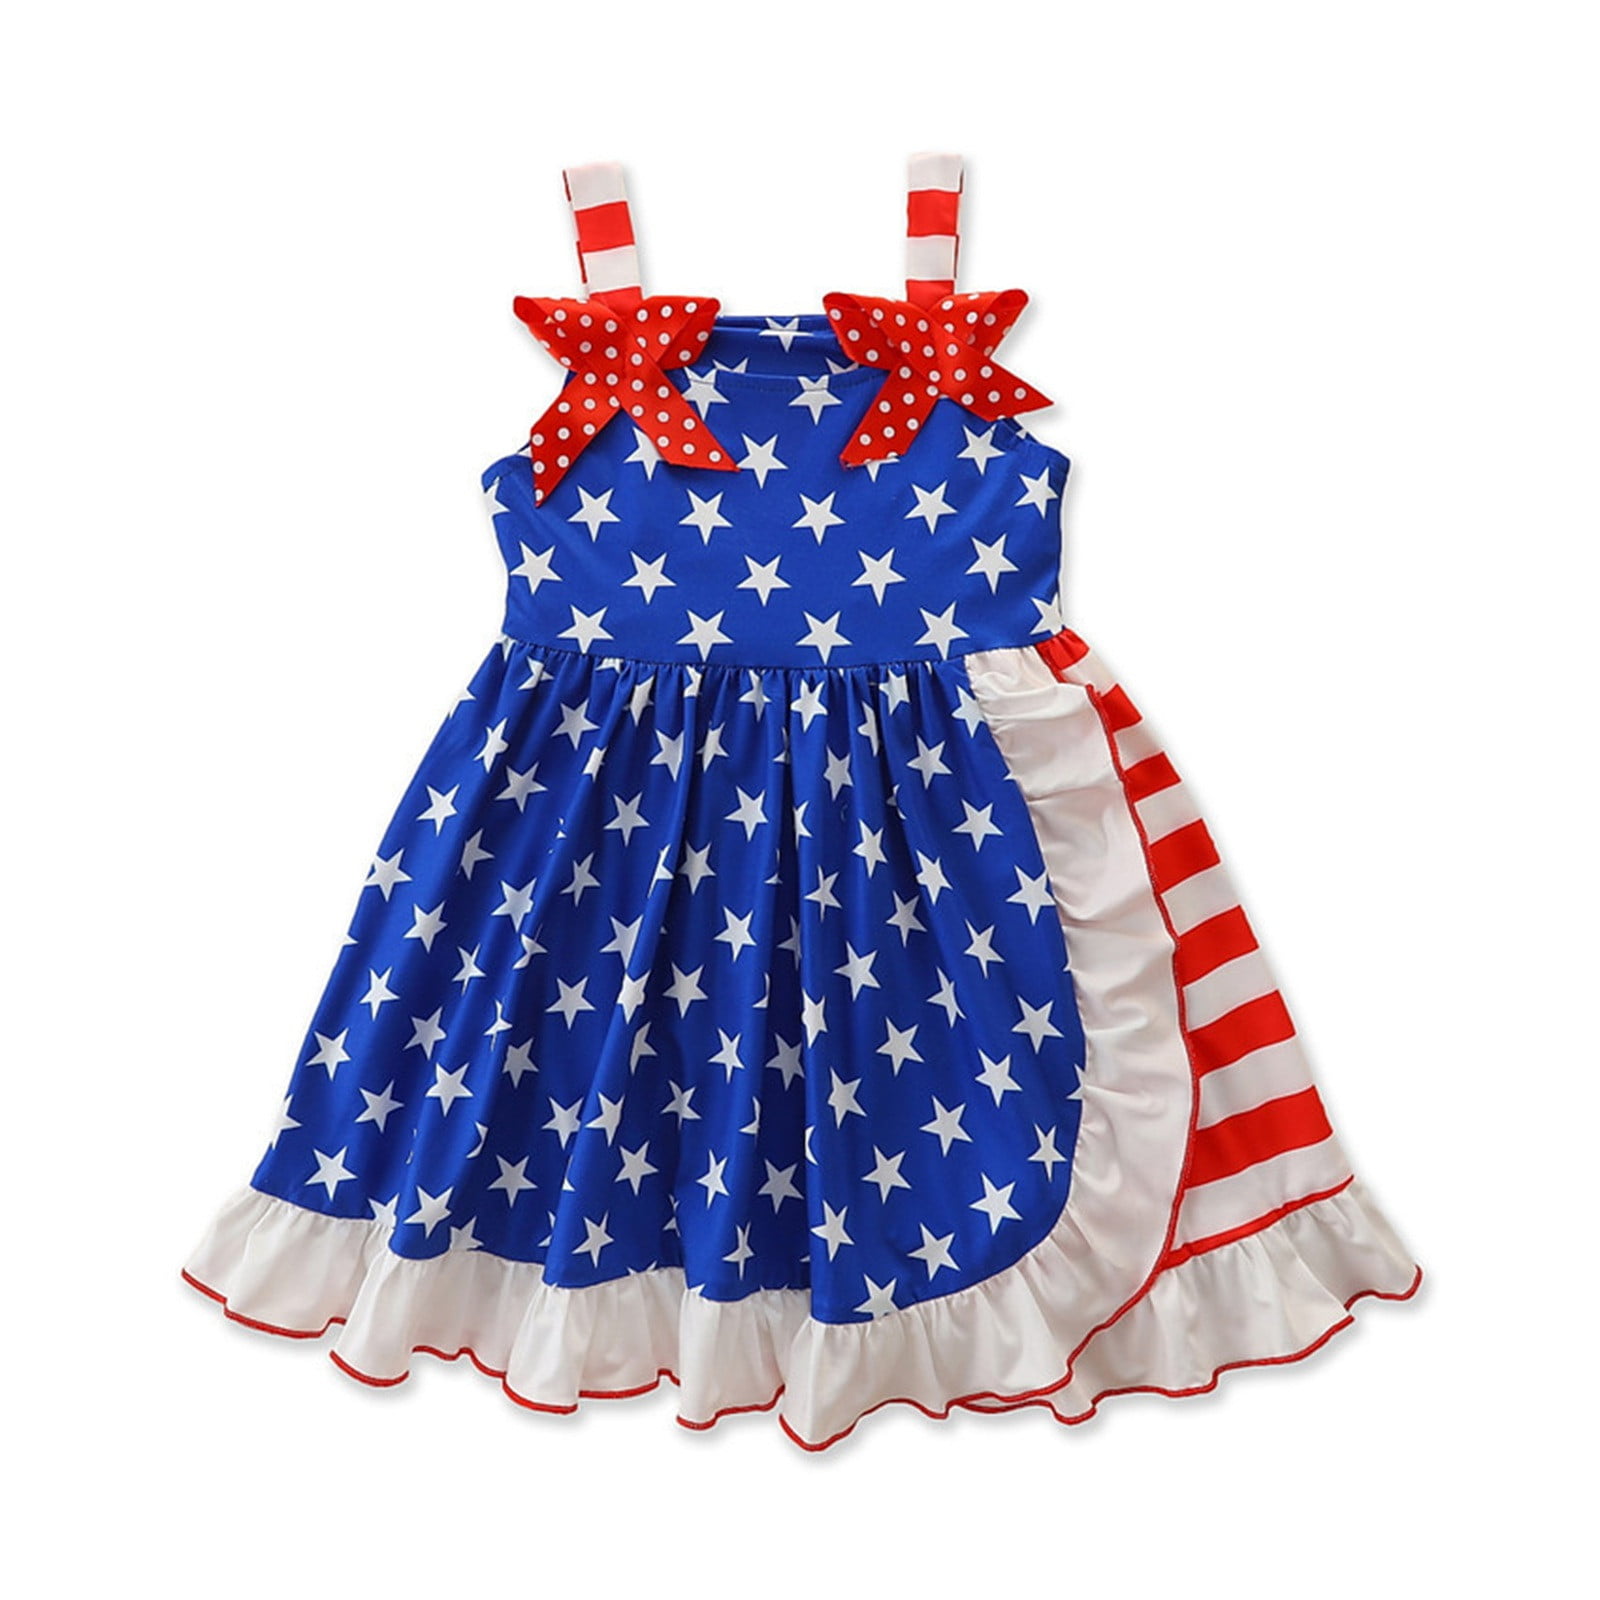 Wesracia Toddler Sundress Girls Star-Stripe Outfits 1-5T 4th of July Accessories For Girls Casual Dress 